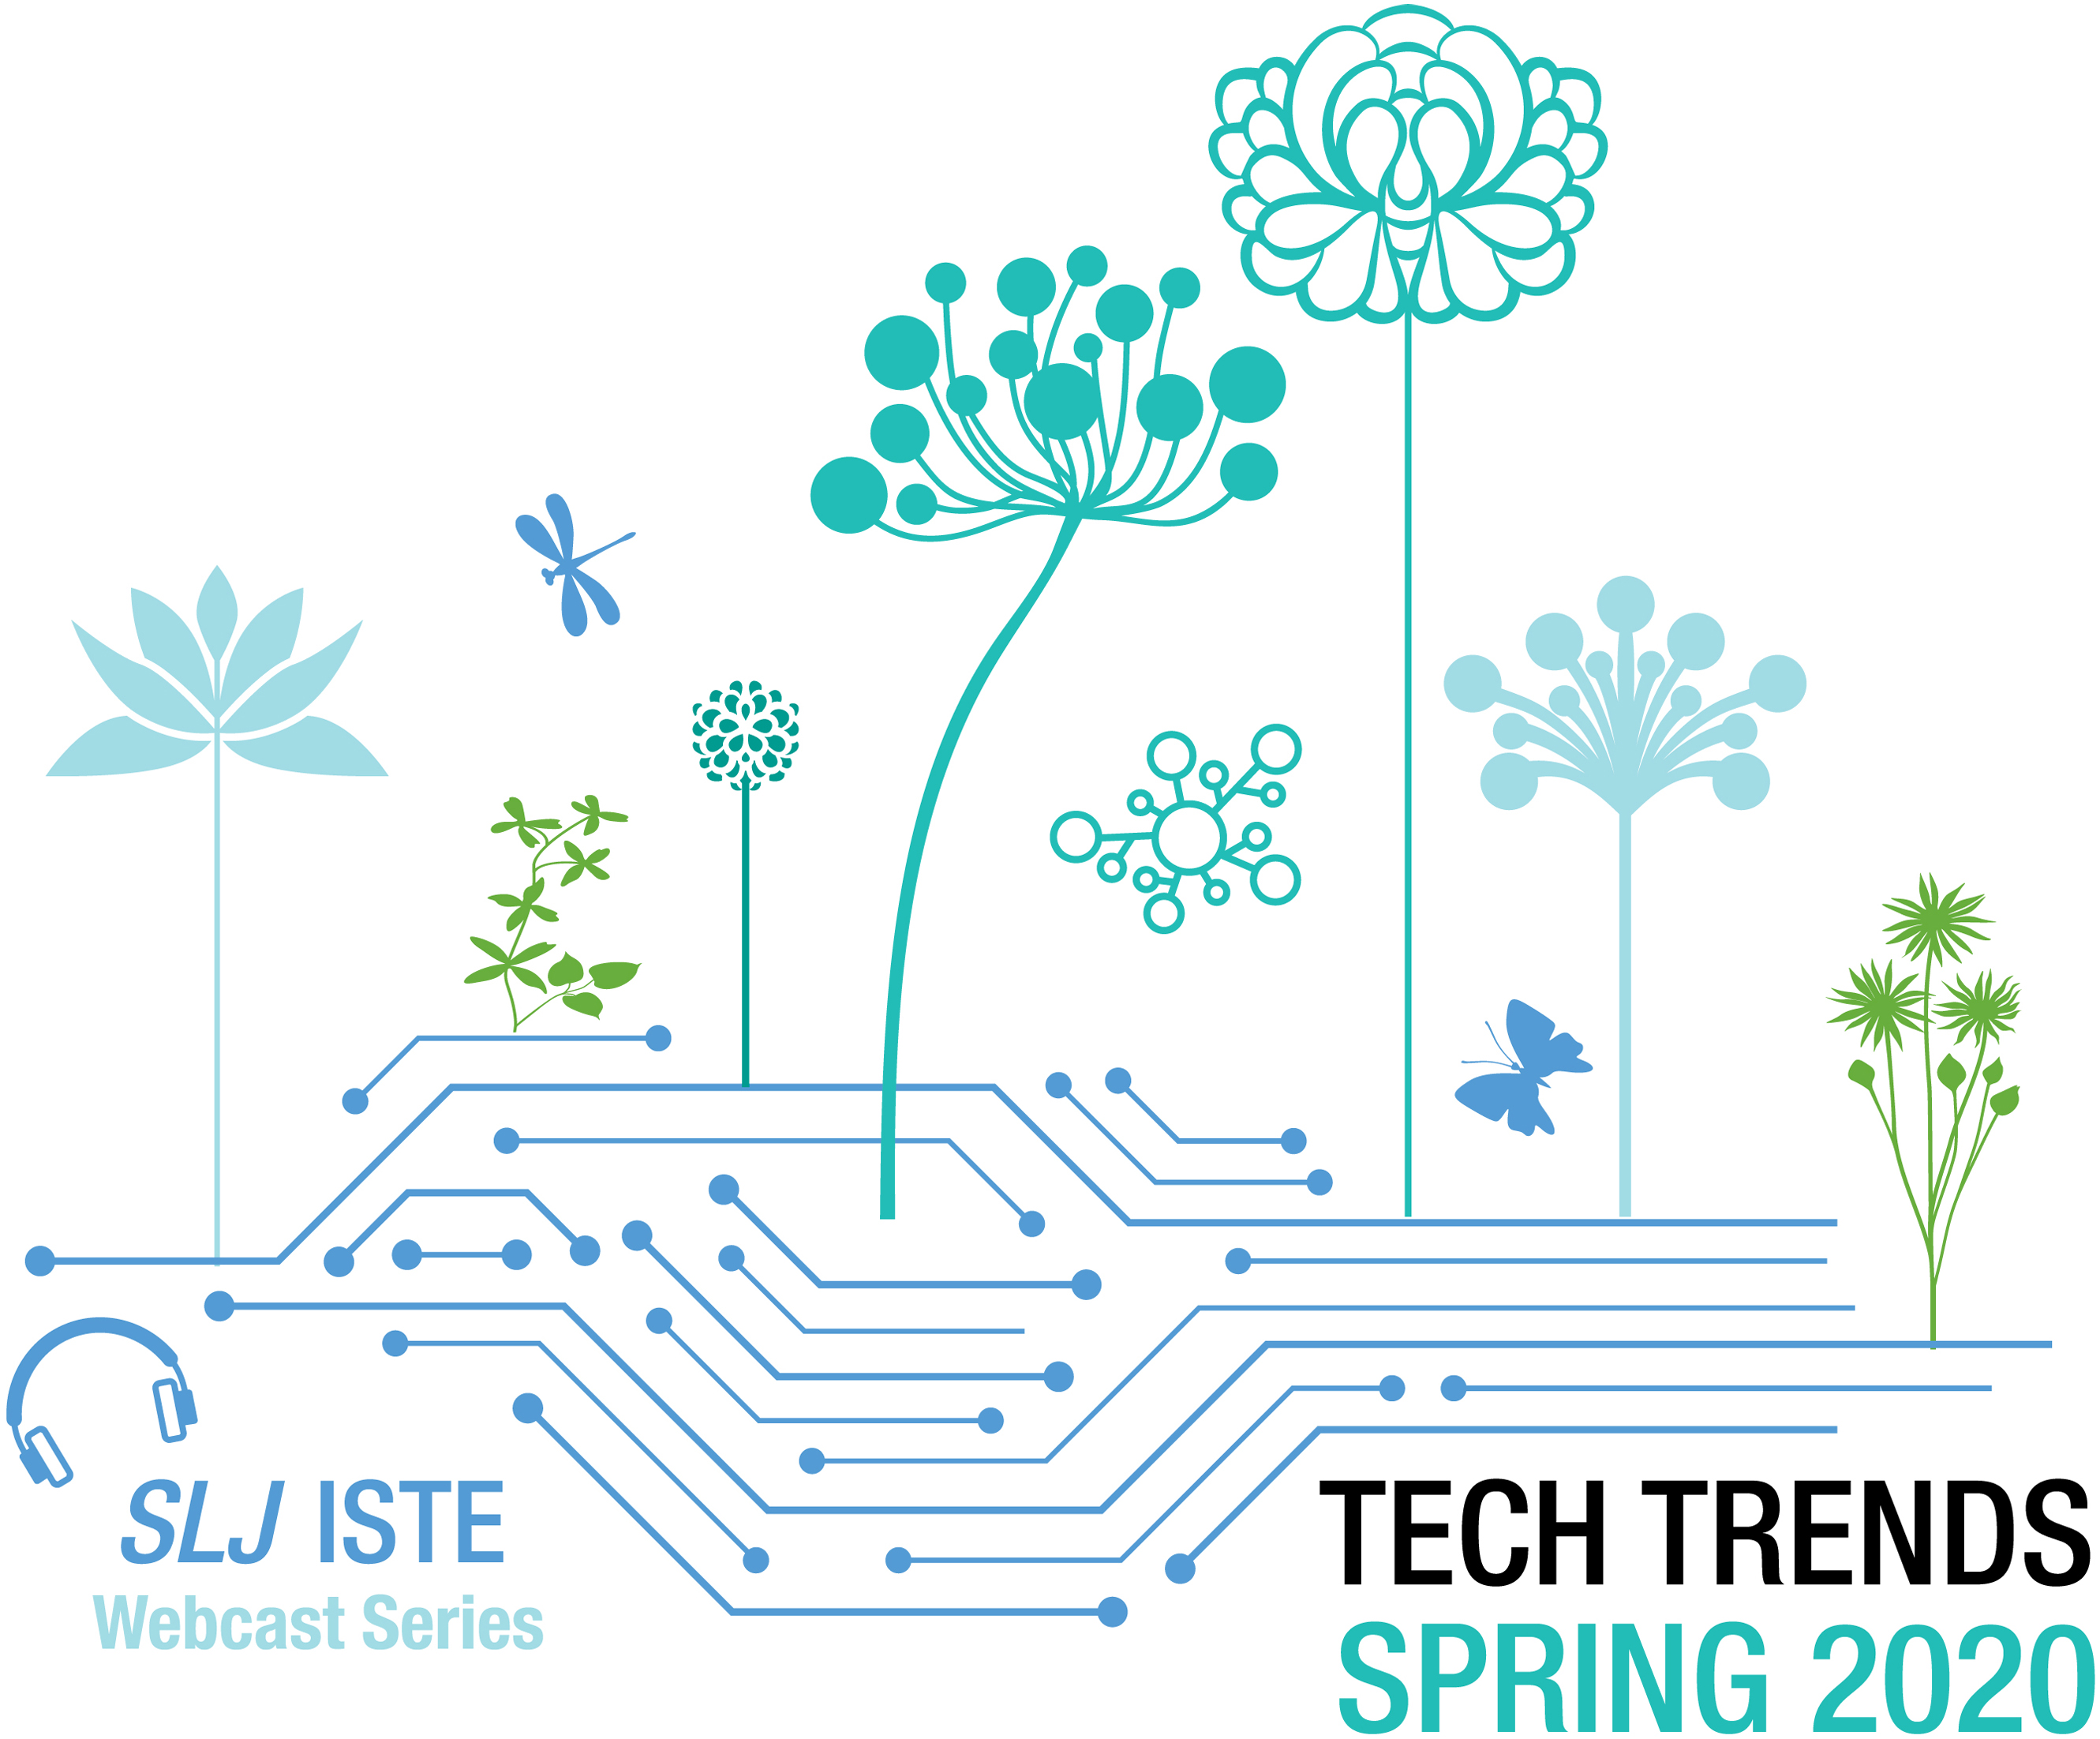 SLJ/ISTE Webcast Series Returns with Tech Trends Spring 2020